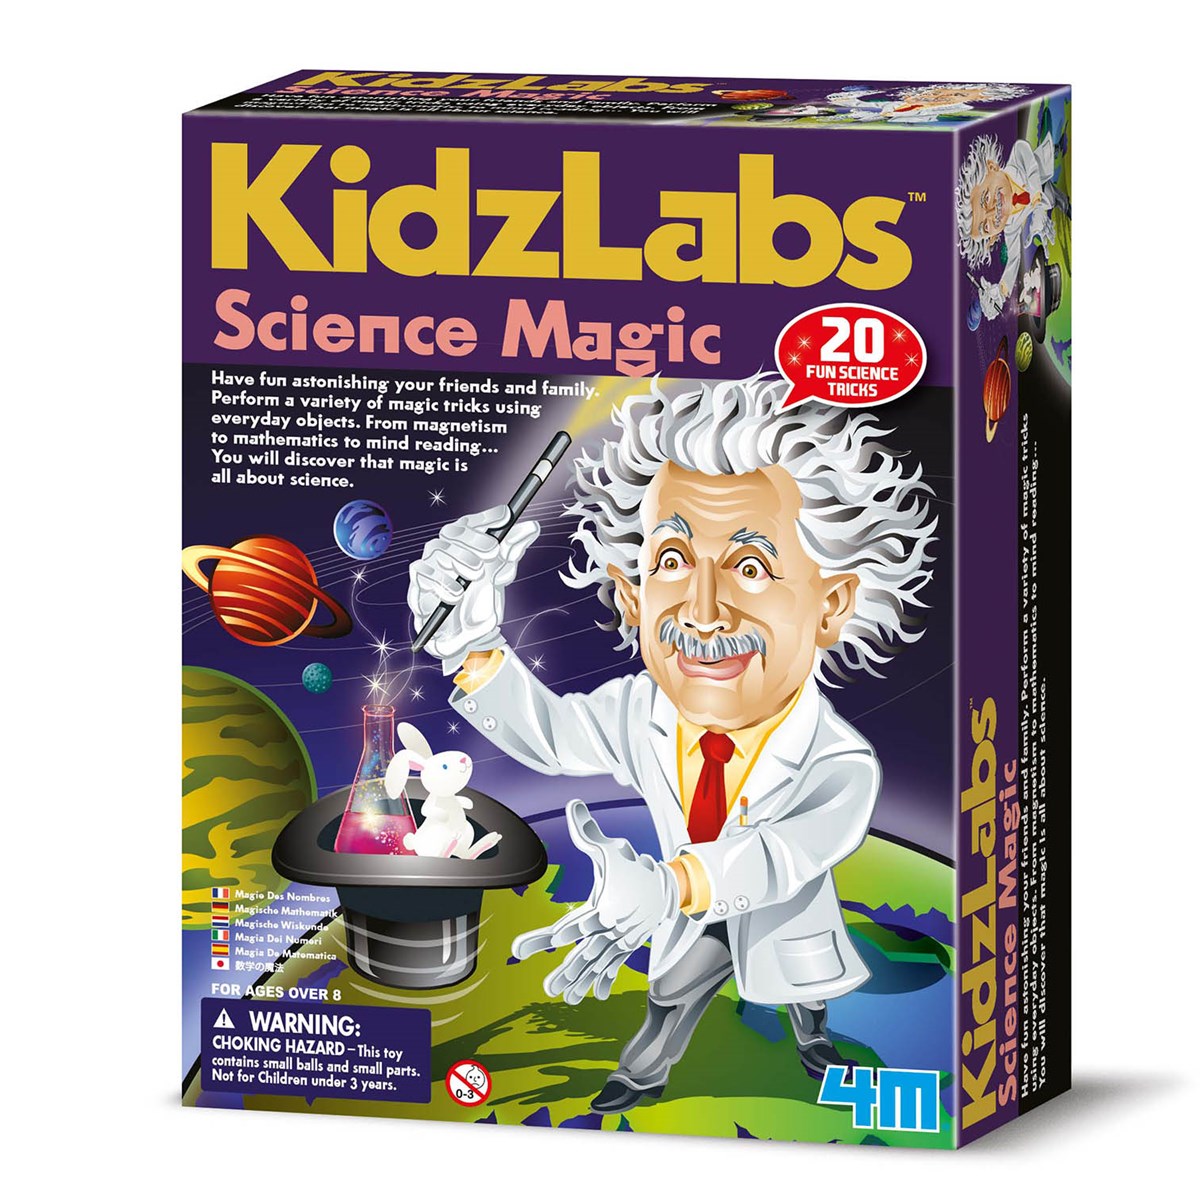 KidzLabs Science Magic box, with Albert Einstein taking a rabbit out of a hat